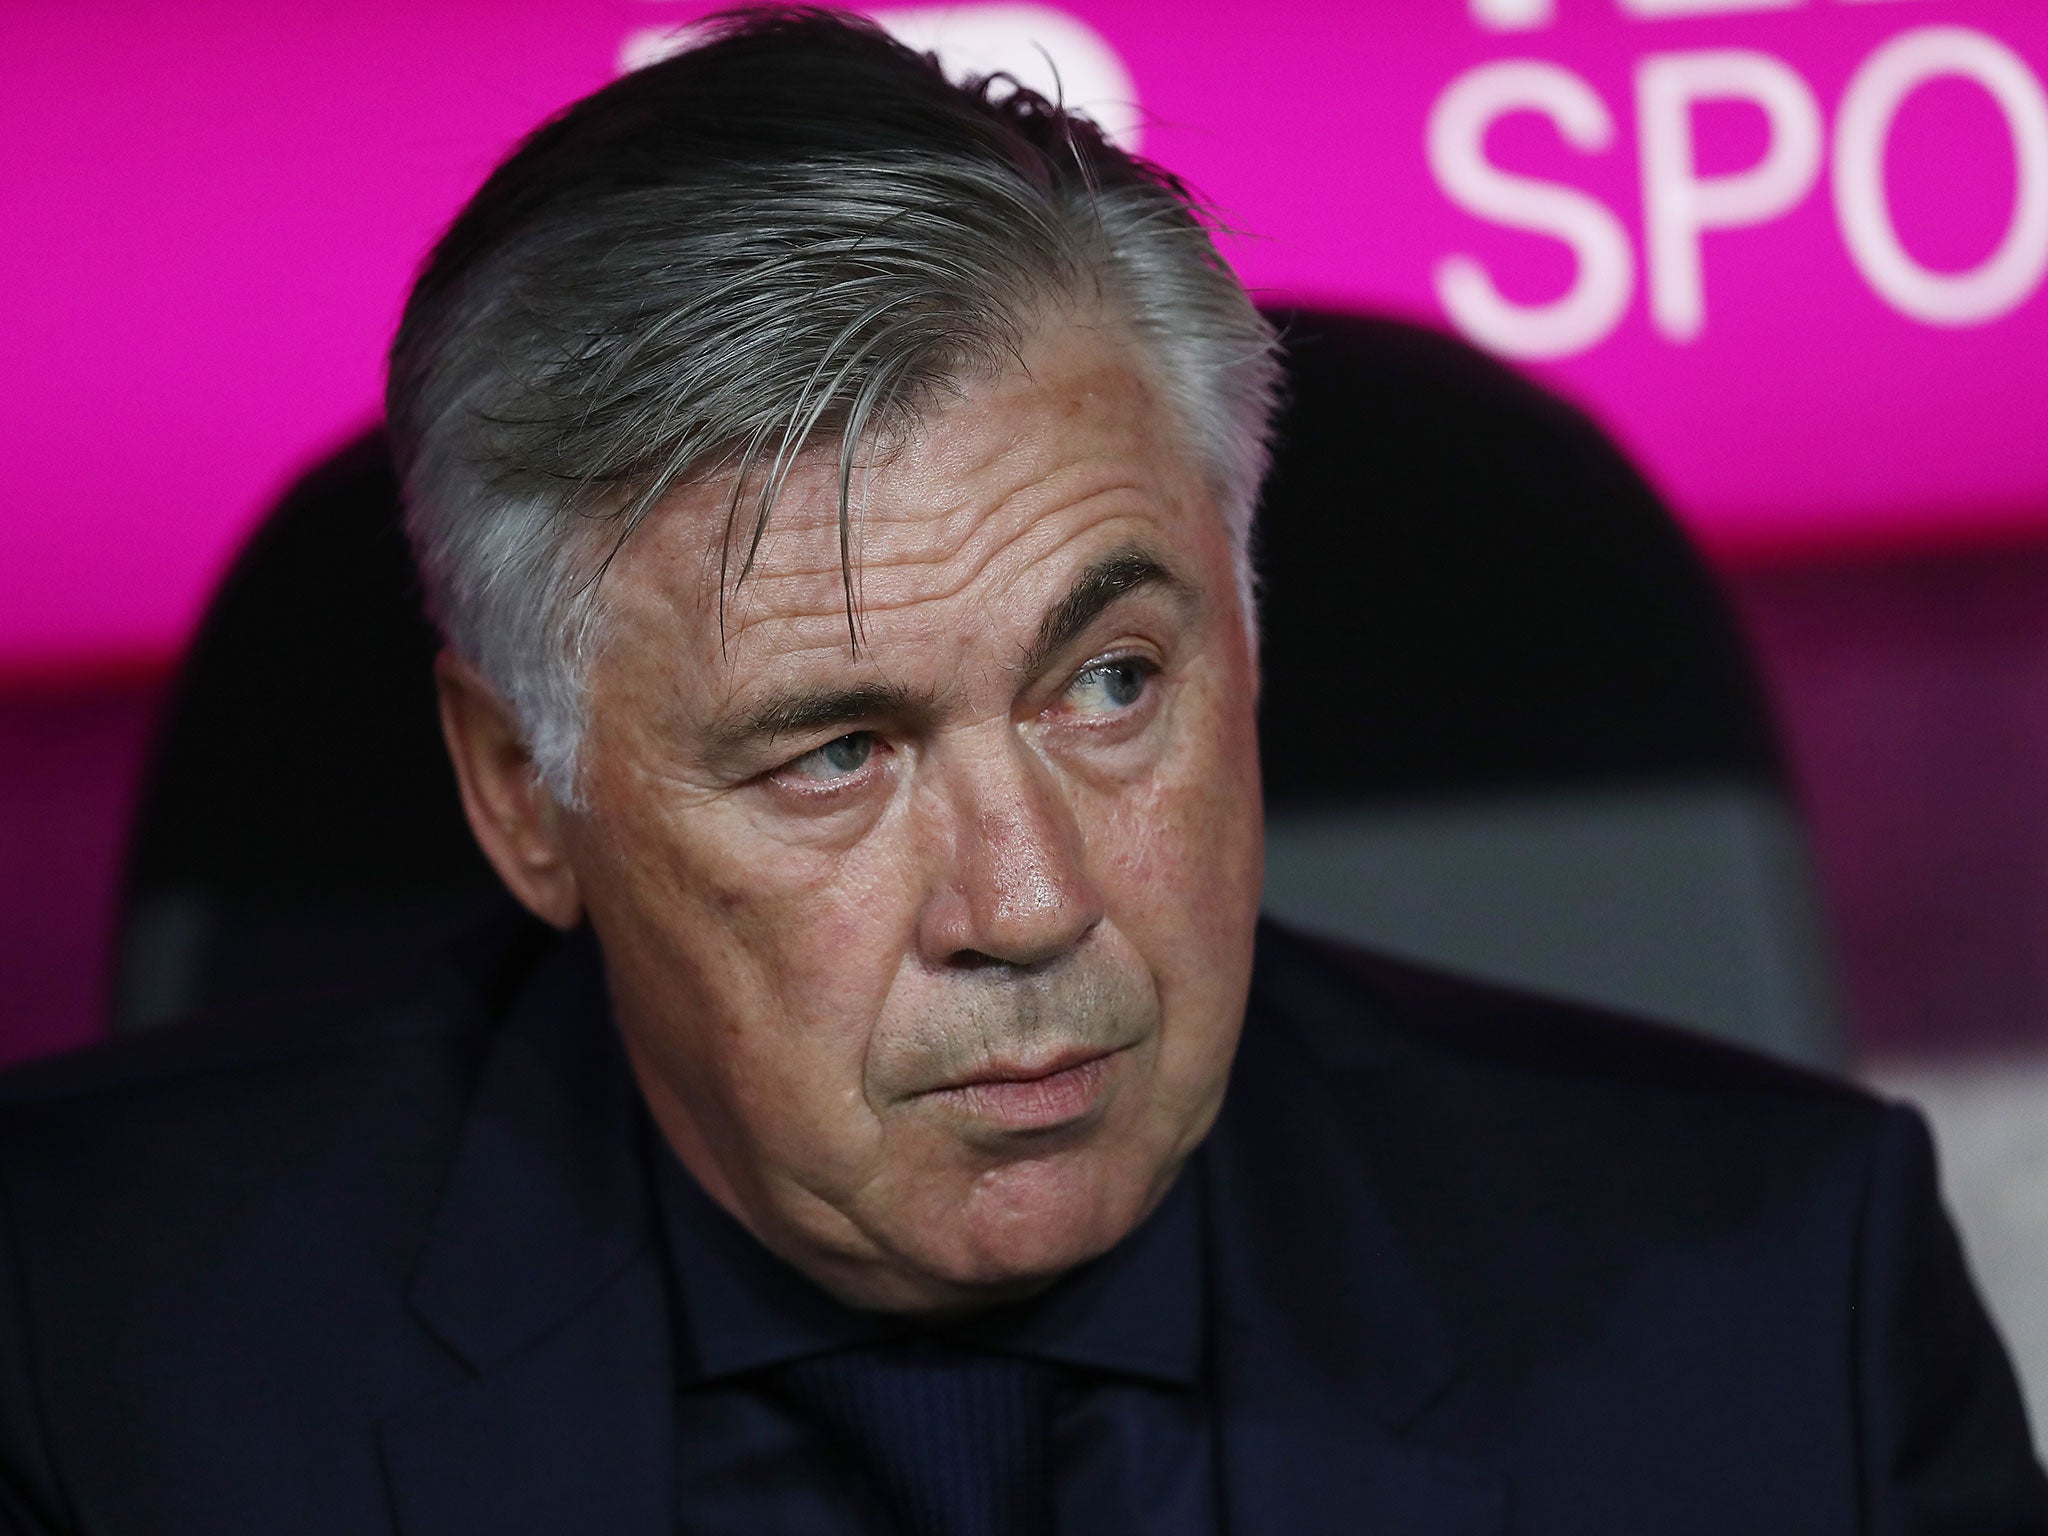 Carlo Ancelotti is currently out of work having recently been sacked by Bayern Munich